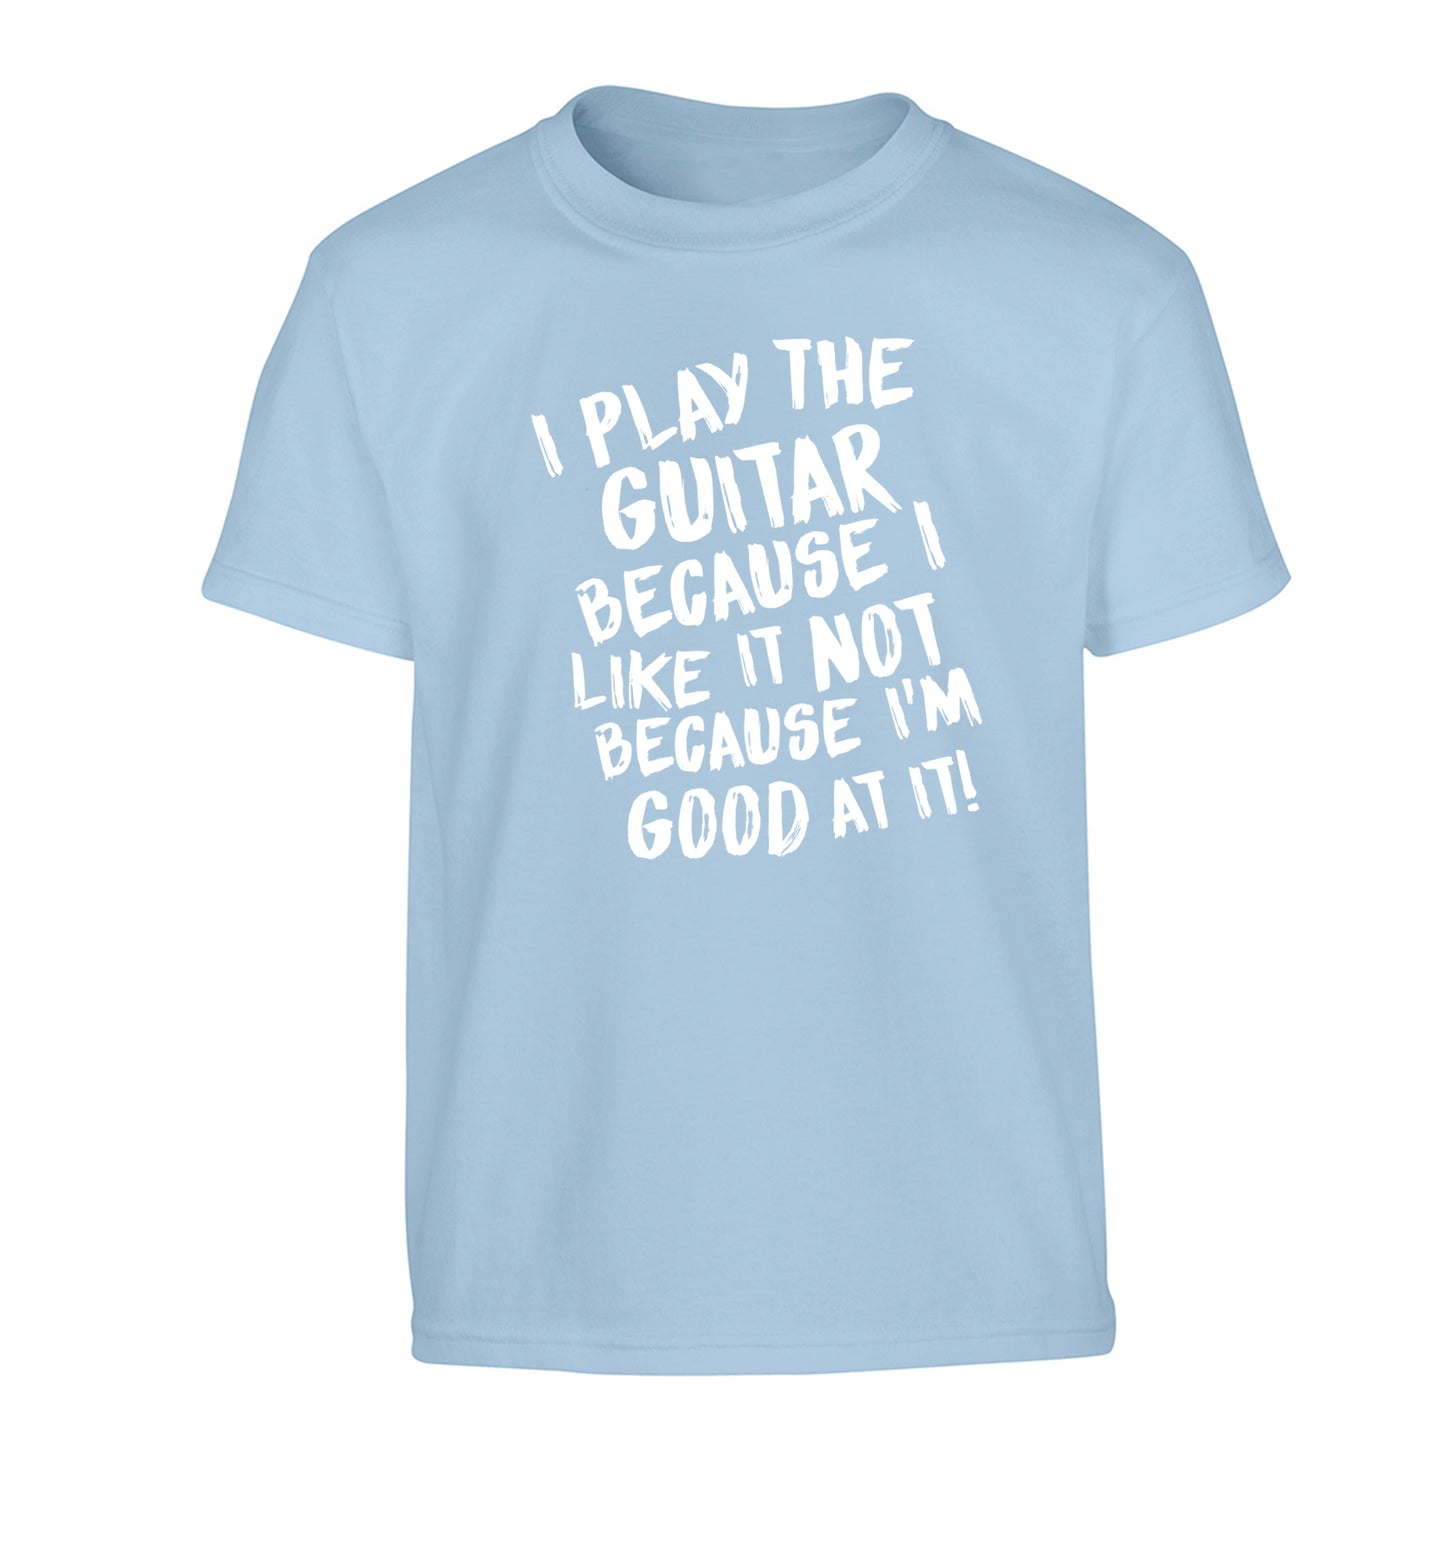 I play the guitar because I like it not because I'm good at it Children's light blue Tshirt 12-14 Years